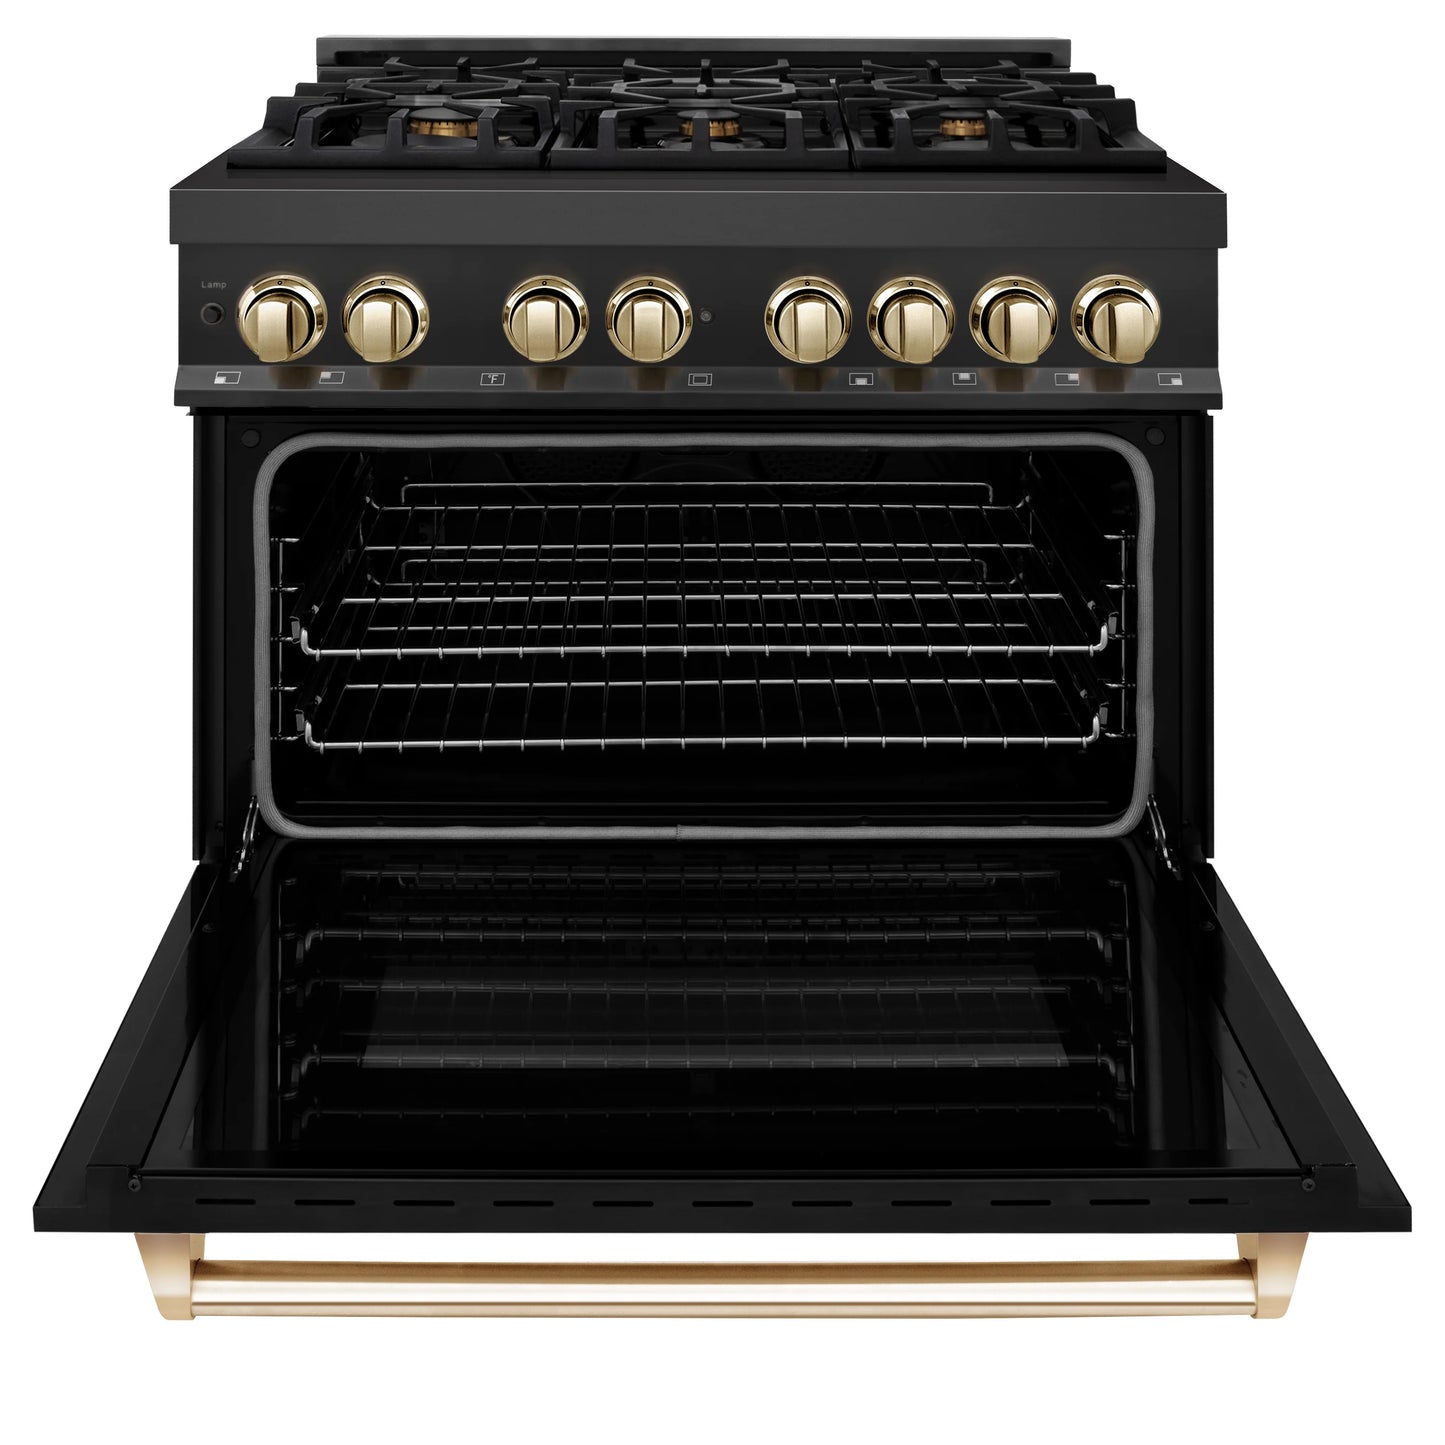 ZLINE Autograph Edition 36 in. Dual Fuel Range with Gas Stove and Electric Oven in Black Stainless Steel with Champagne Bronze Accents (RABZ-36-CB)